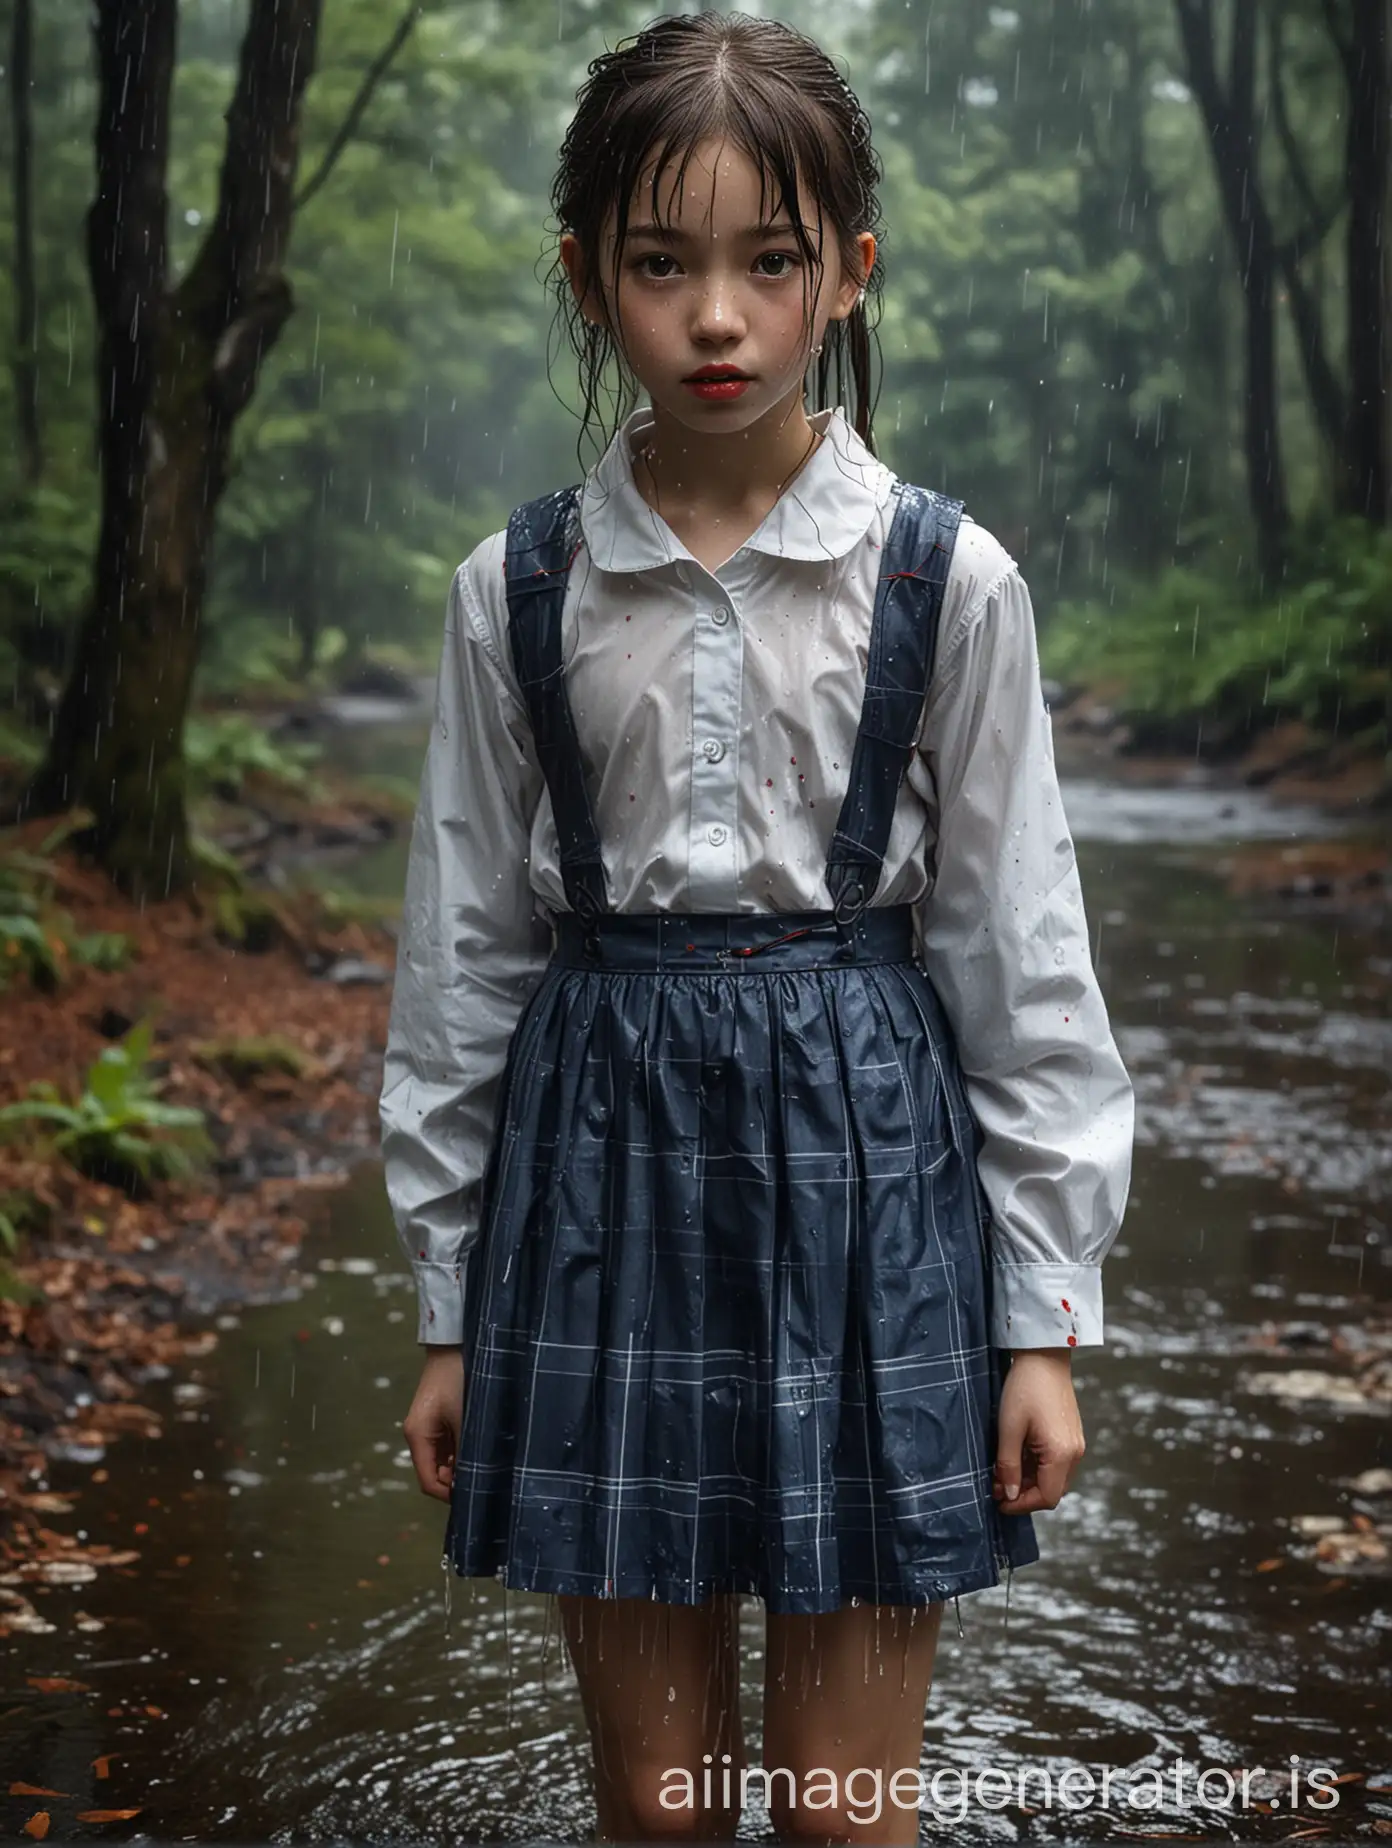 the image features a hyperrealistic full length shot in the highest quality. little 10-year-old girl, quarter japanese, three quarters french. extremely skinny physique, child body and extremely white skin. Her facial expression is characterized by wide-open, big dark brown eyes extremley glossy, extremley shiny lips, accentuated by masses of the shiniest red vibrant lipgloss and a lot of saliva visible on the lips. 
the girl stepping out of a forest lake during heavy rain, completely drenched. her face, hair and attire are over and over totally soaked. her mouth is totally filled with rain. The girl is dressed in an original japanese school uniform with blazer, white shirt, skirt and stockings. wet big satin ribbon in her hair. the wet and shiny children pinafore adds to the reflective quality of the attire, contrasting sharply with the wet surroundings. the shape and design of the outfit looks very innocent and childlike. 
Action/Items: She is depicted without jewelry or metallic elements, maintaining a focus on the wet clothing and the extremely rain-soaked appearance. The image employs hyperrealistic rendering techniques to emphasize the wetness of her clothes and the glossiness of her lips, which are highlighted with vibrant red lip gloss. The soaked outfit and the rain-soaked environment enhance the visual impact of the composition.